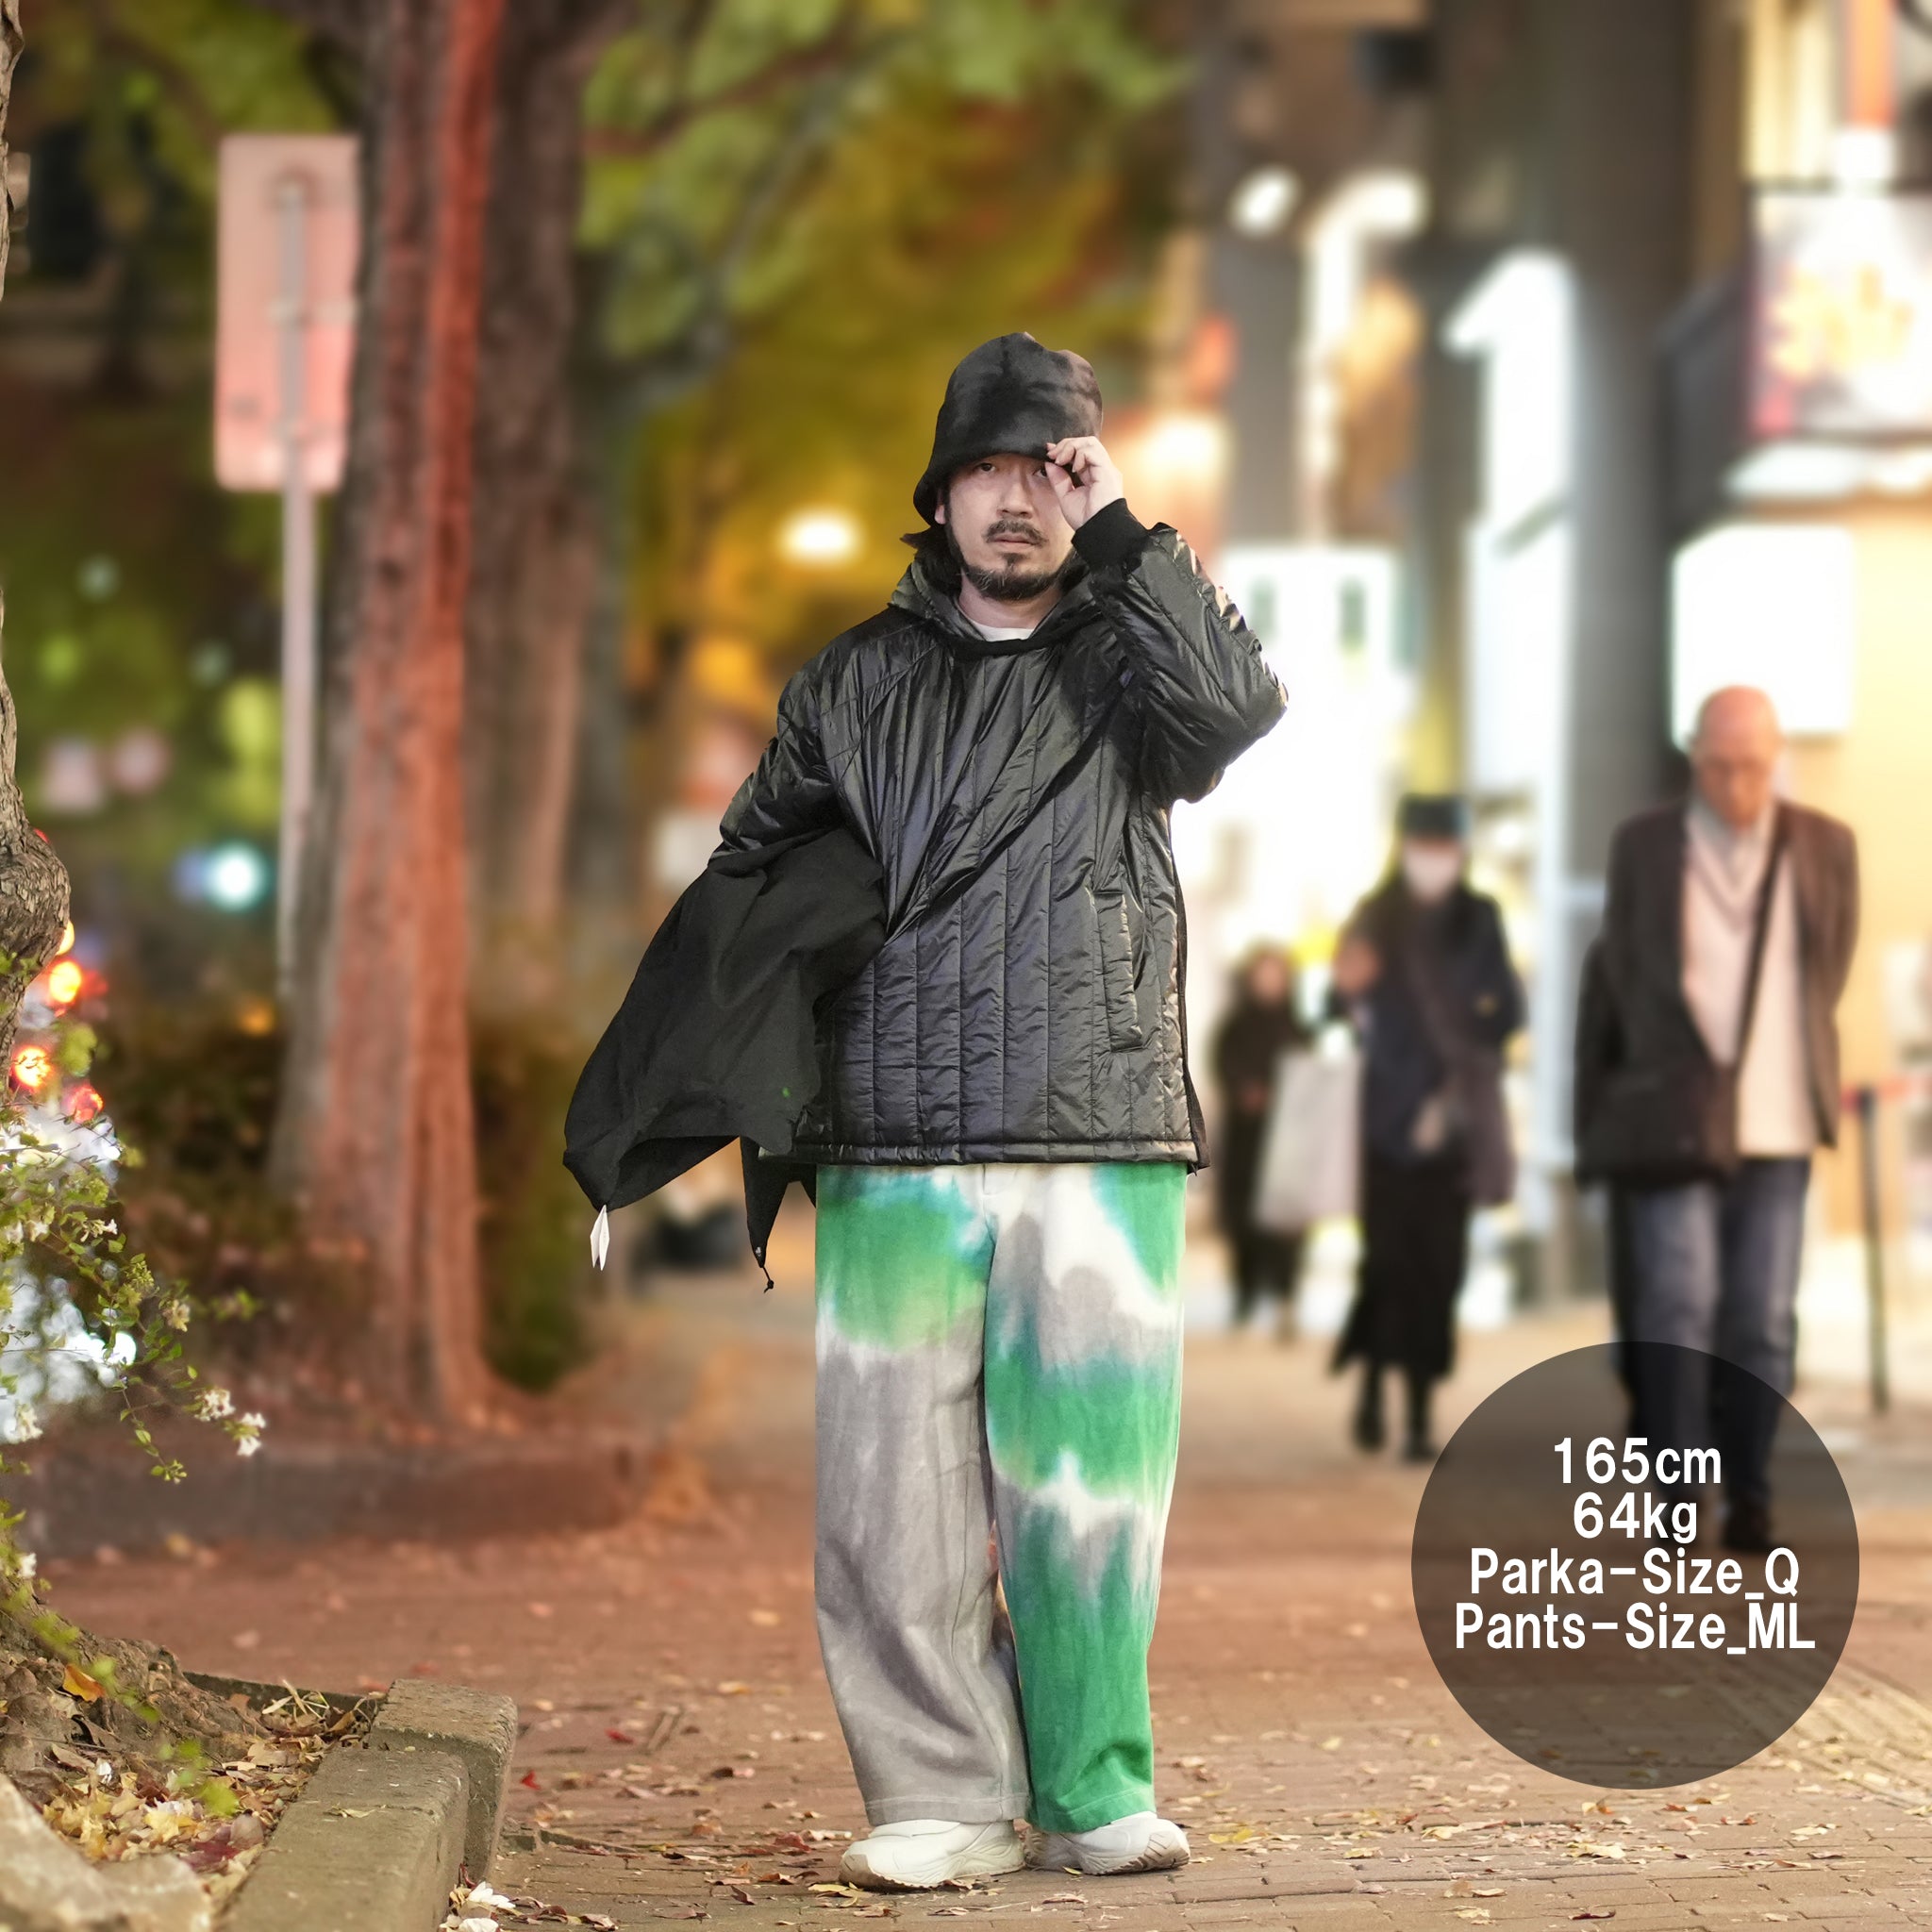 Name:Tiedye Pile Pants | Color:Mix/Coffee【AMBERGLEAM_アンバーグリーム】| No:1144131112